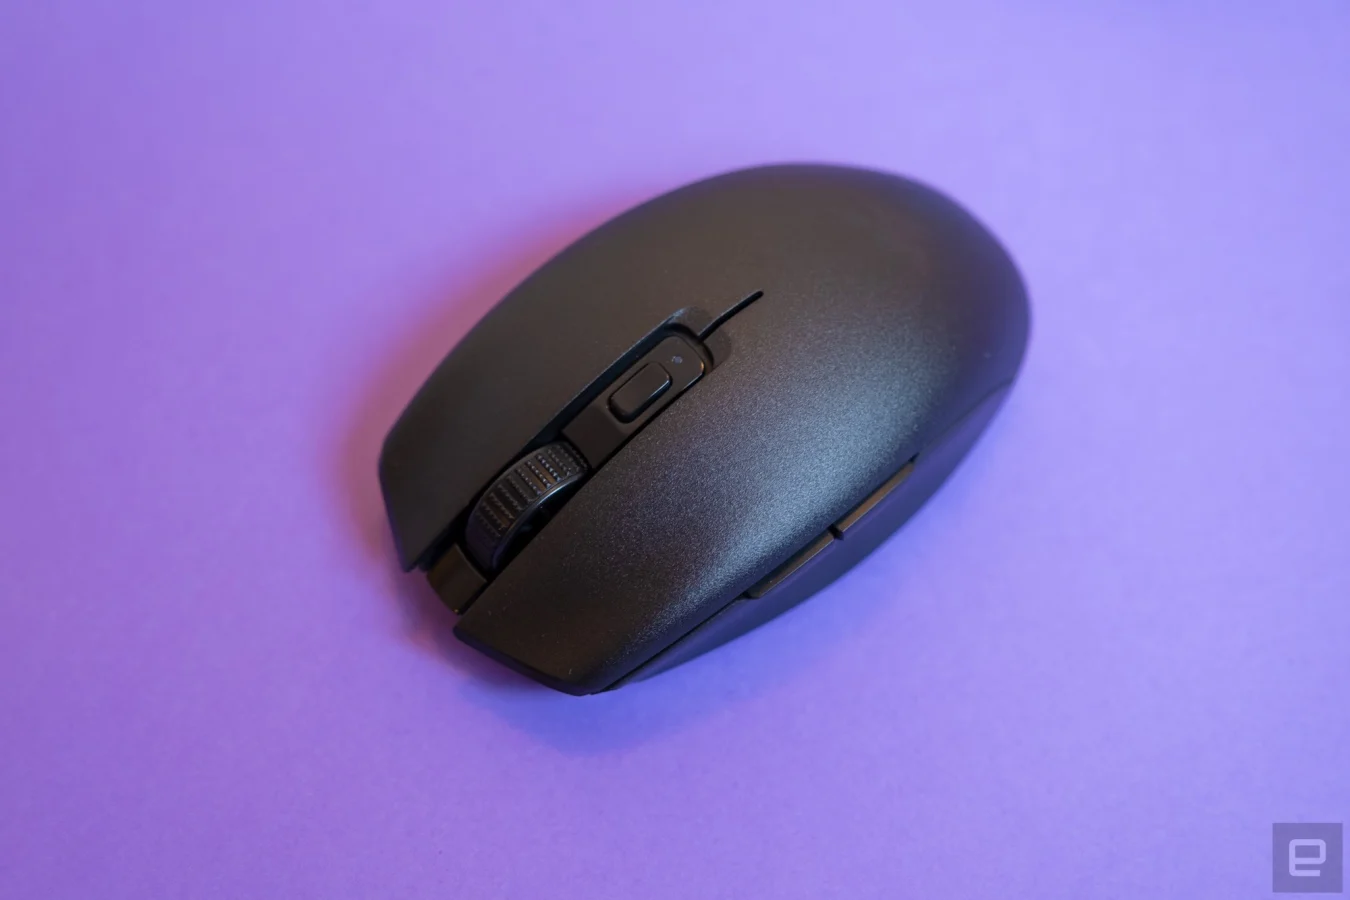 Mouse buyer's guide.